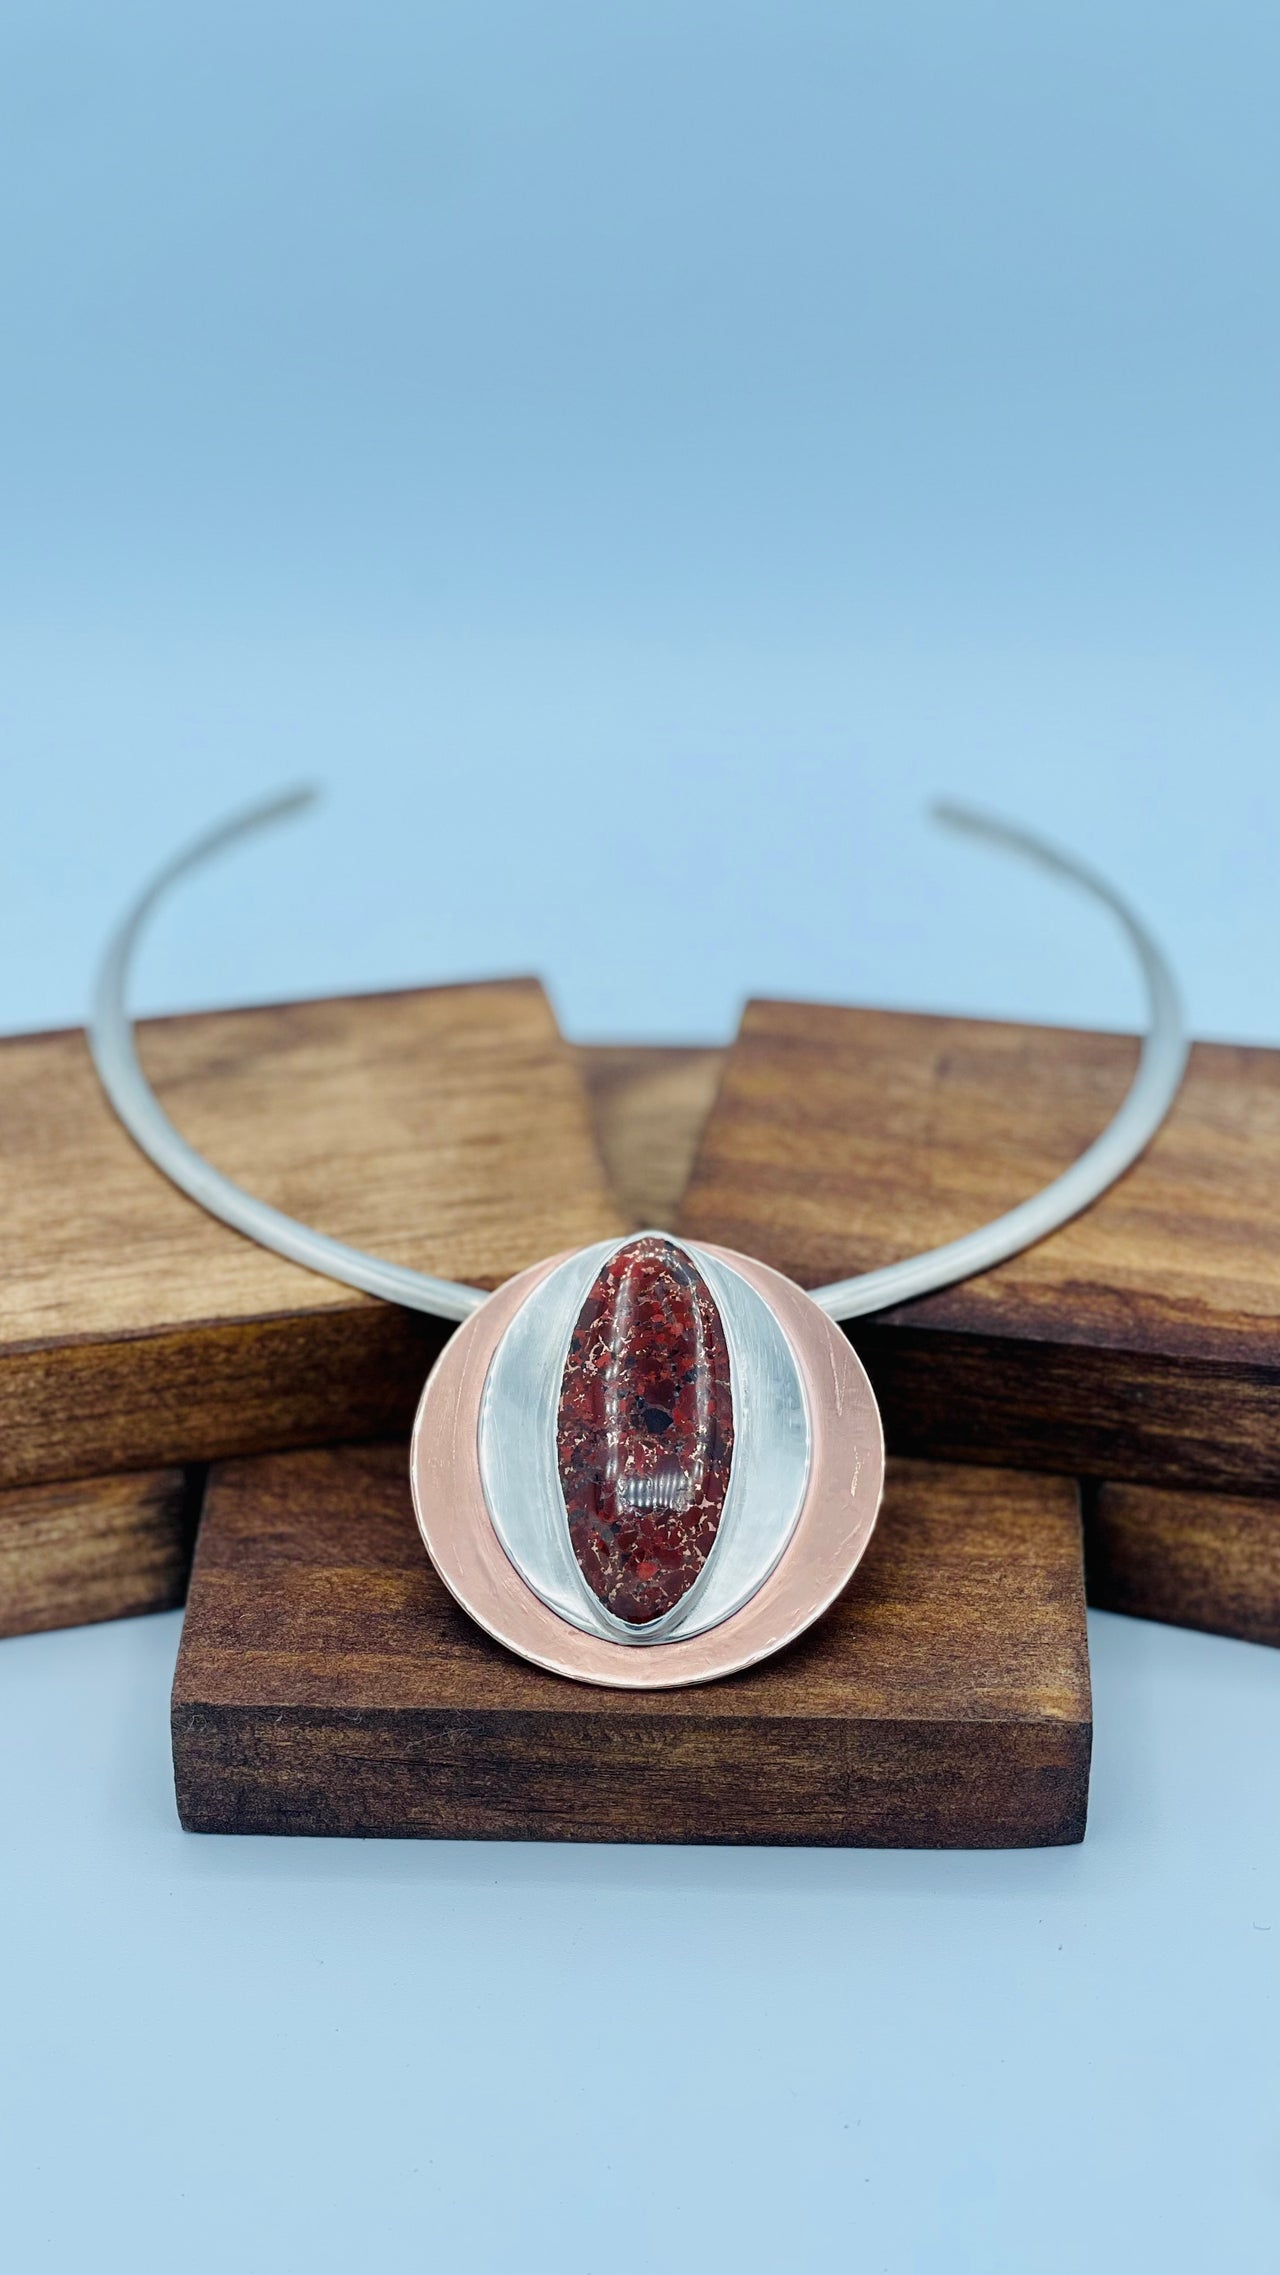 Layers of God (Copper Rose/ Kingston Conglomerate Pendant and Collar)